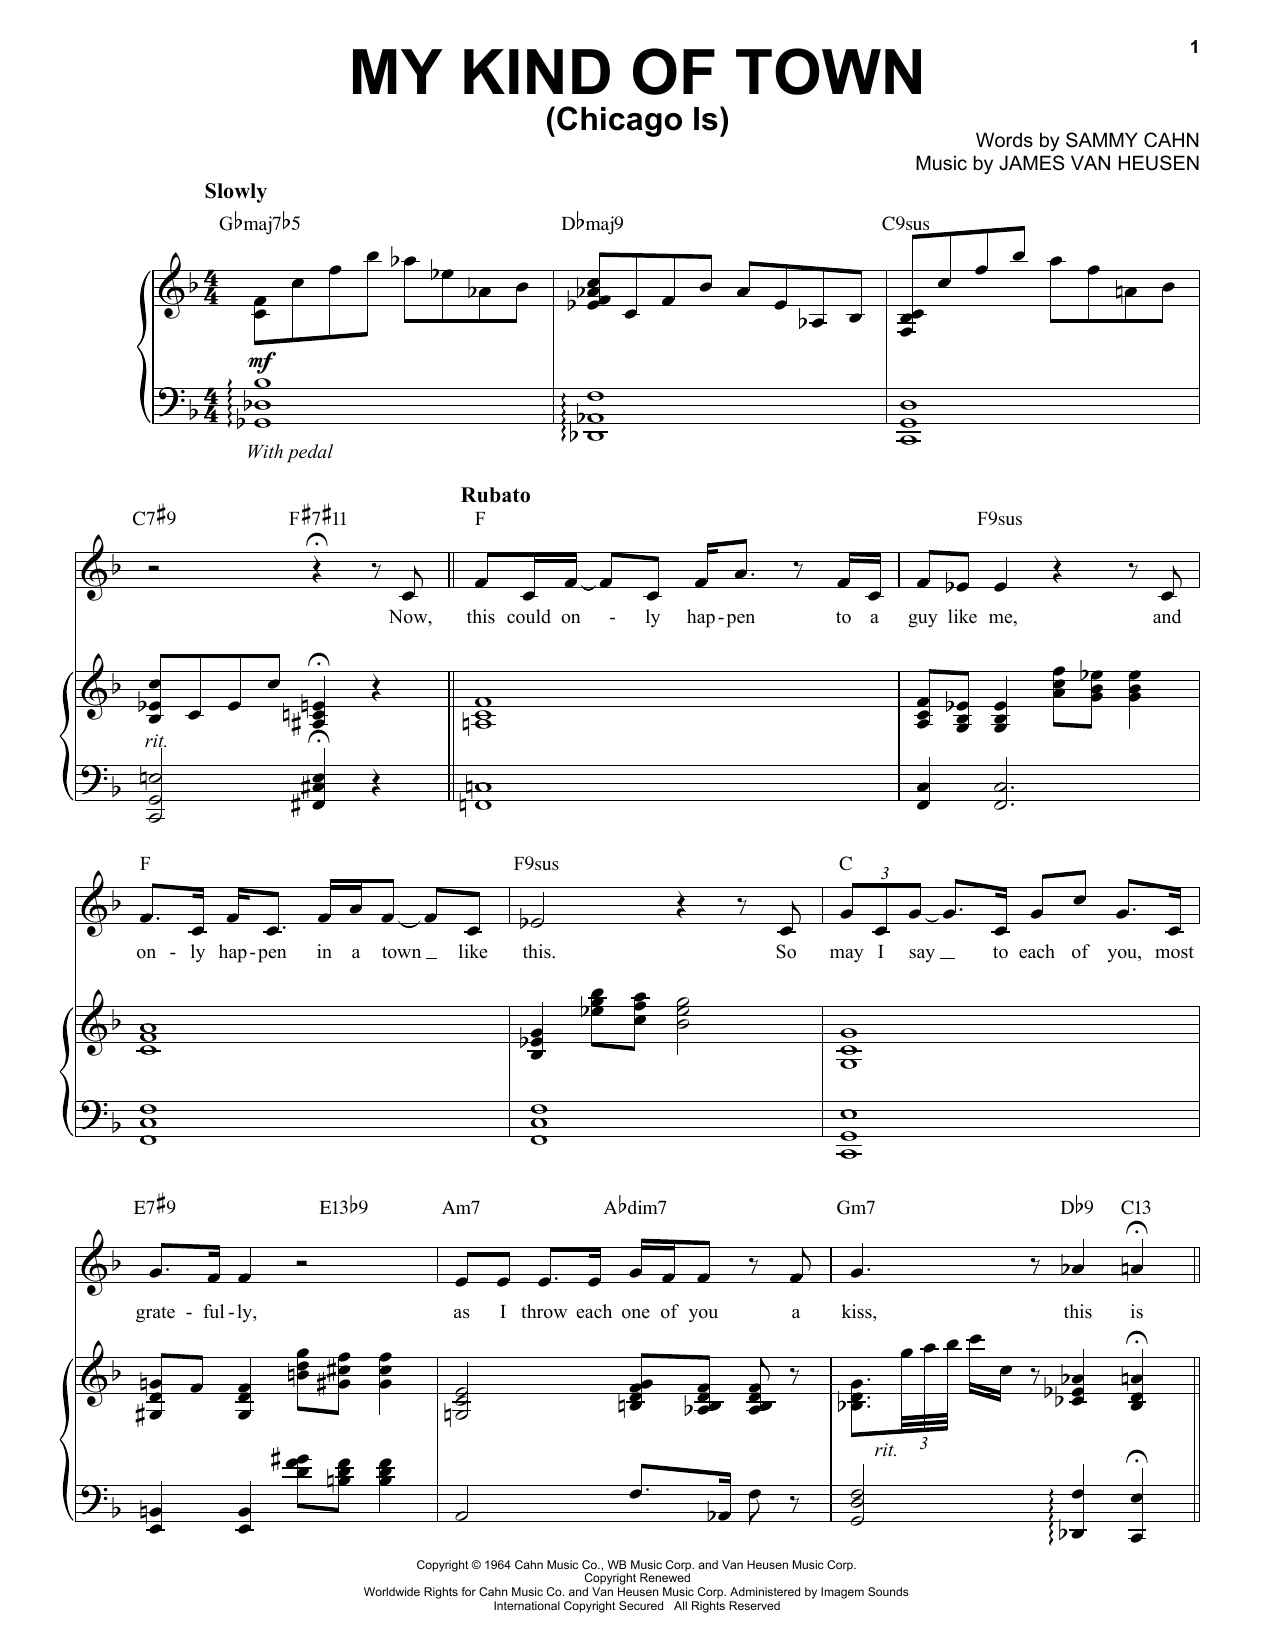 Download Frank Sinatra My Kind Of Town (Chicago Is) Sheet Music